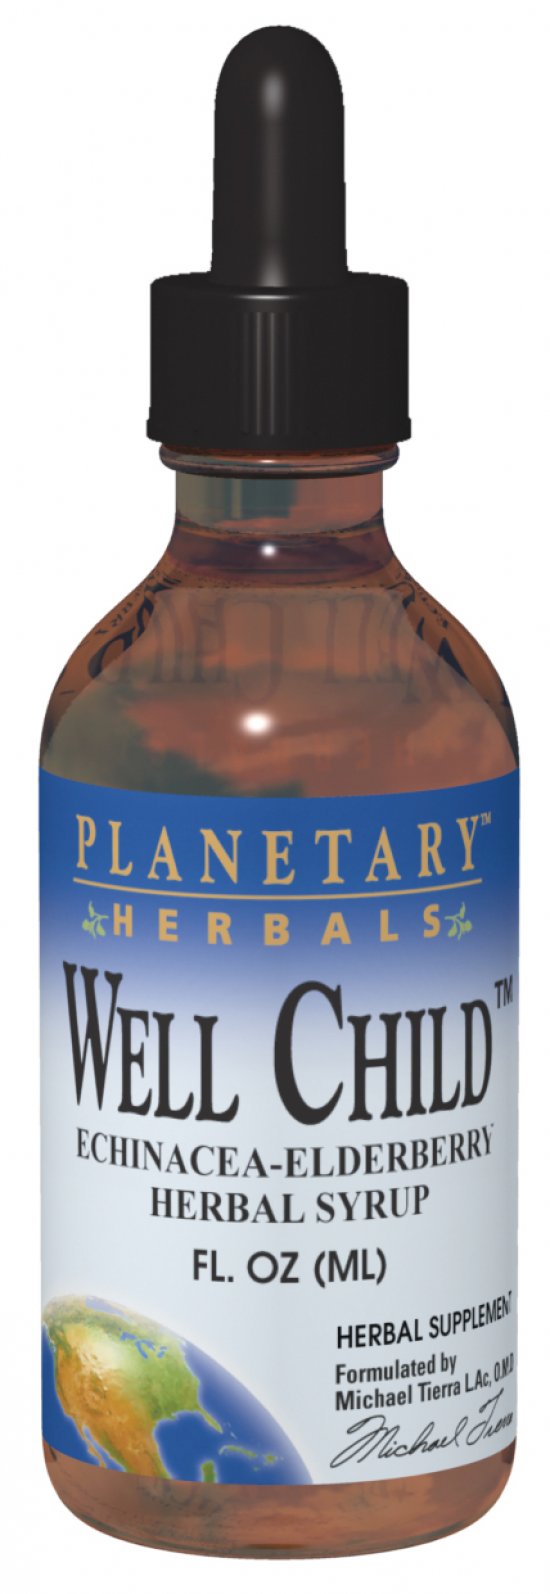 Product Listing Image for Planetary Herbals Well Child